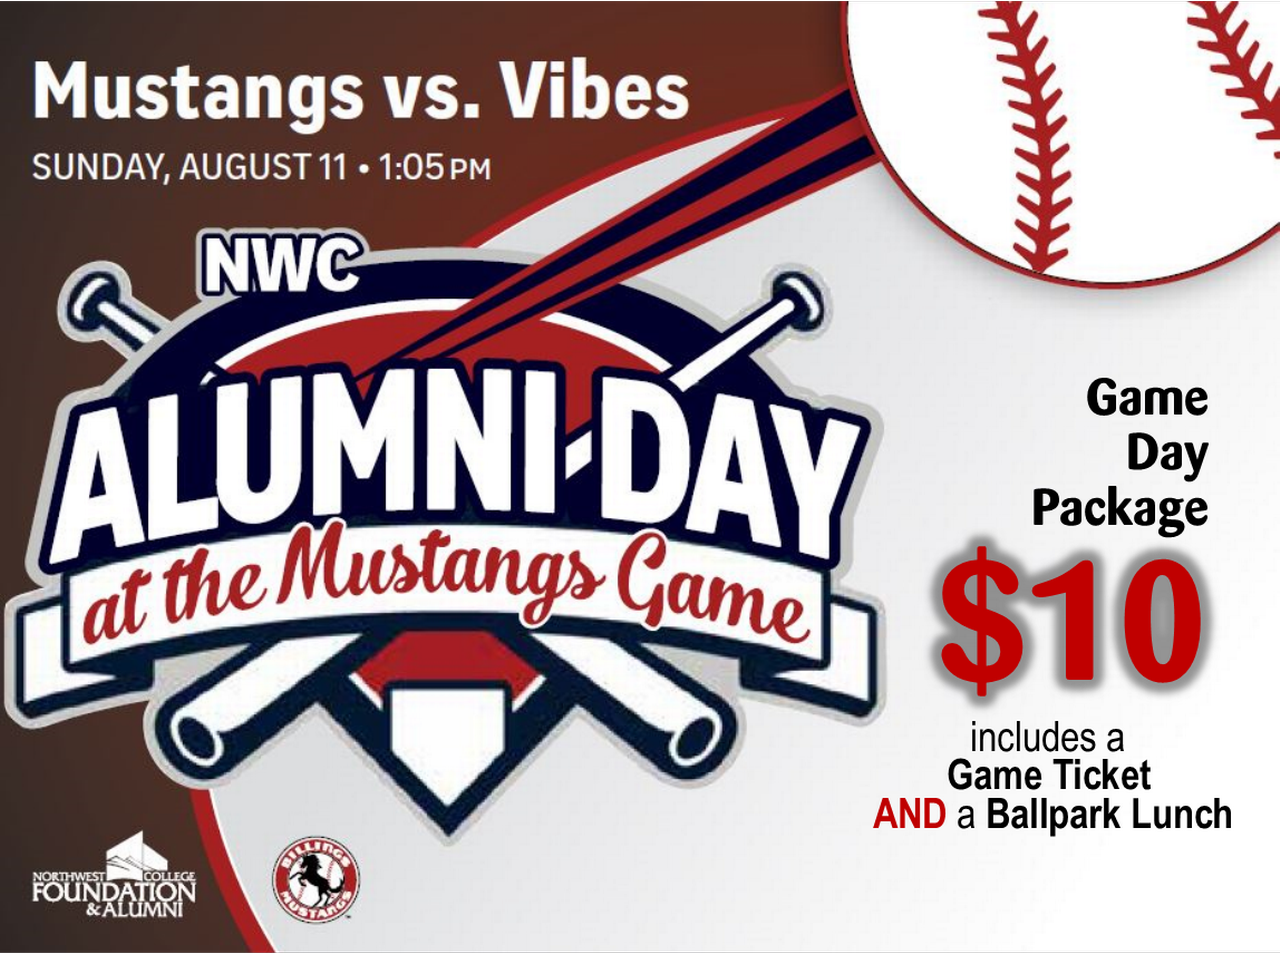 NWC Alumni Day at the Mustangs Game image